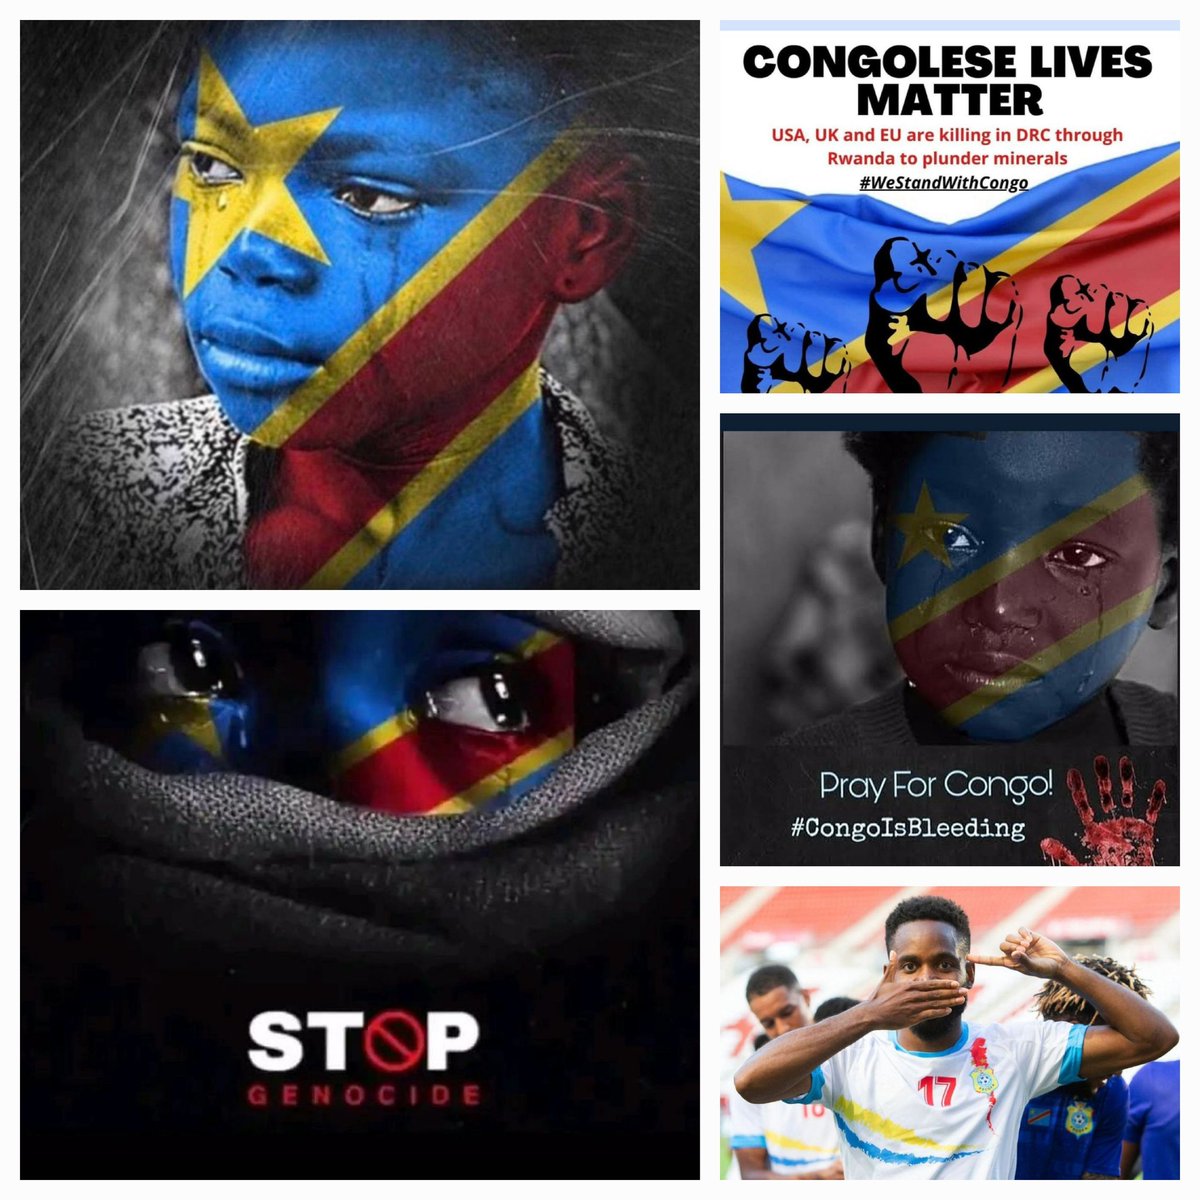 Enough is enough. #CongoleseLivesMatter
#SilenceIsComplicity 
#AfricaStandUp
#OurChildrenWillLive
#NoMoreOfThis